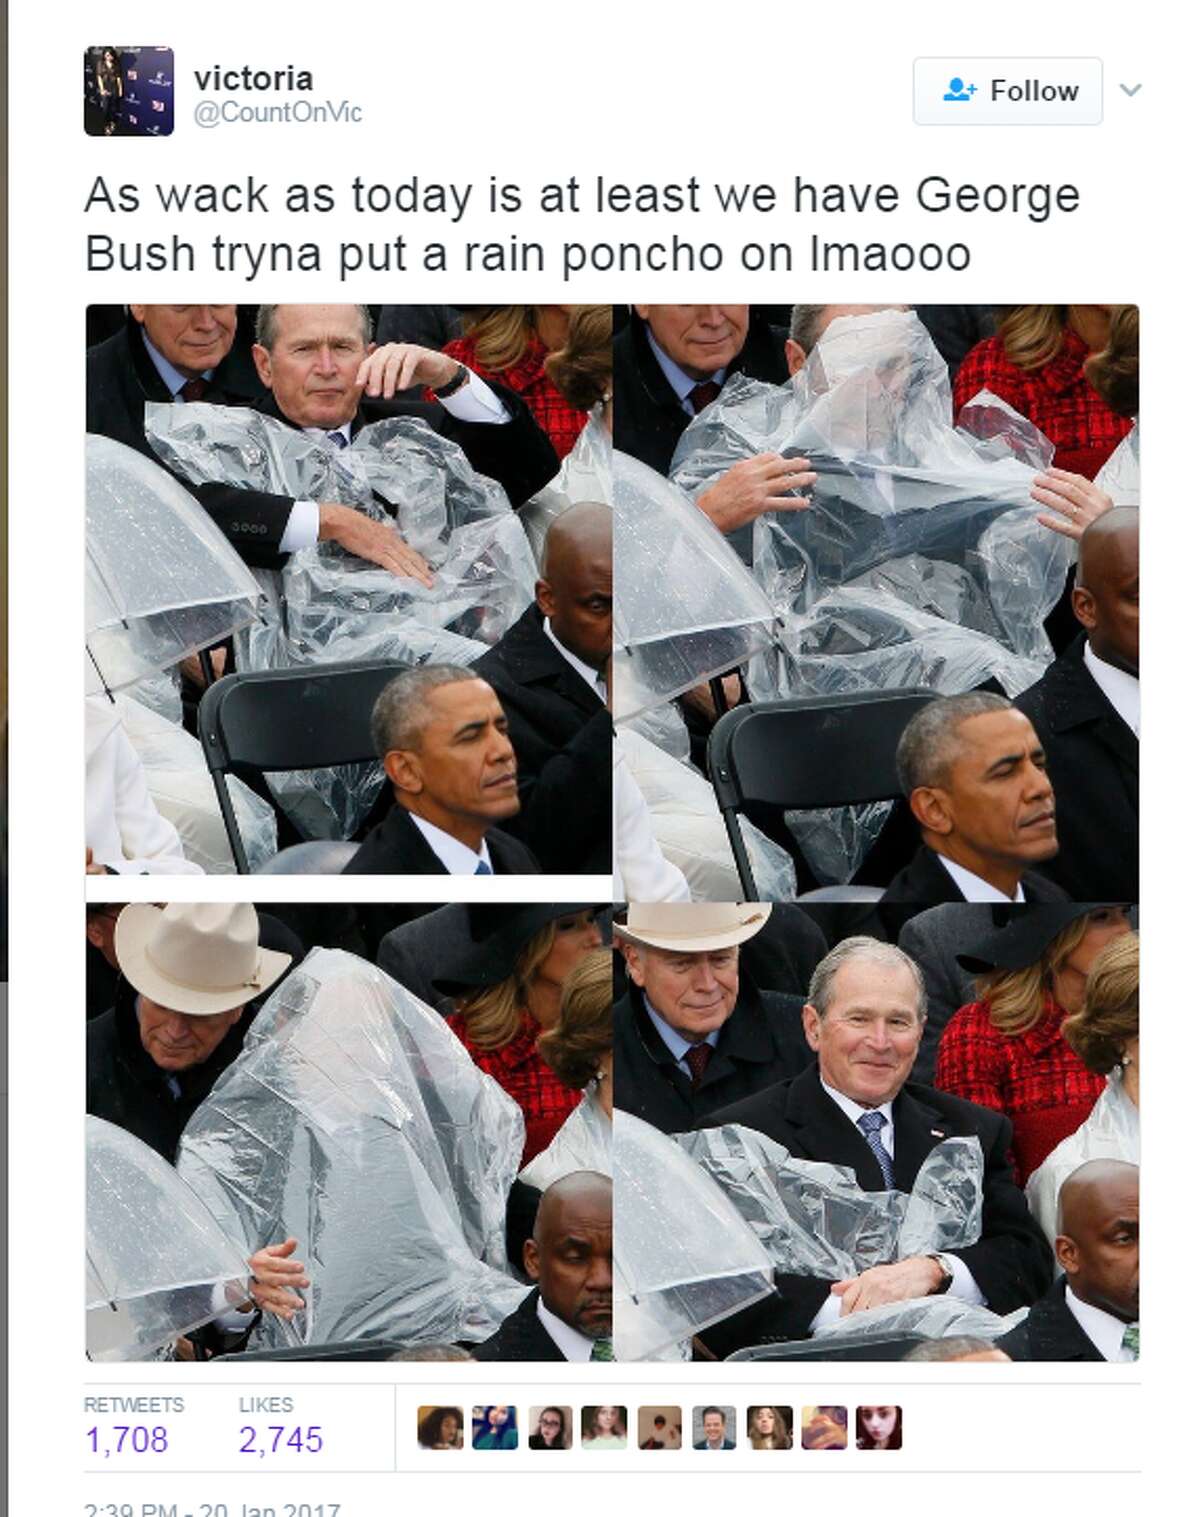 1. 43rd U.S President George W. Bush couldn't figure out how to work a poncho, smiled in defeat  @CountOnVic: As wack as today is at least we have George Bush tryna put on a rain poncho lmaooo